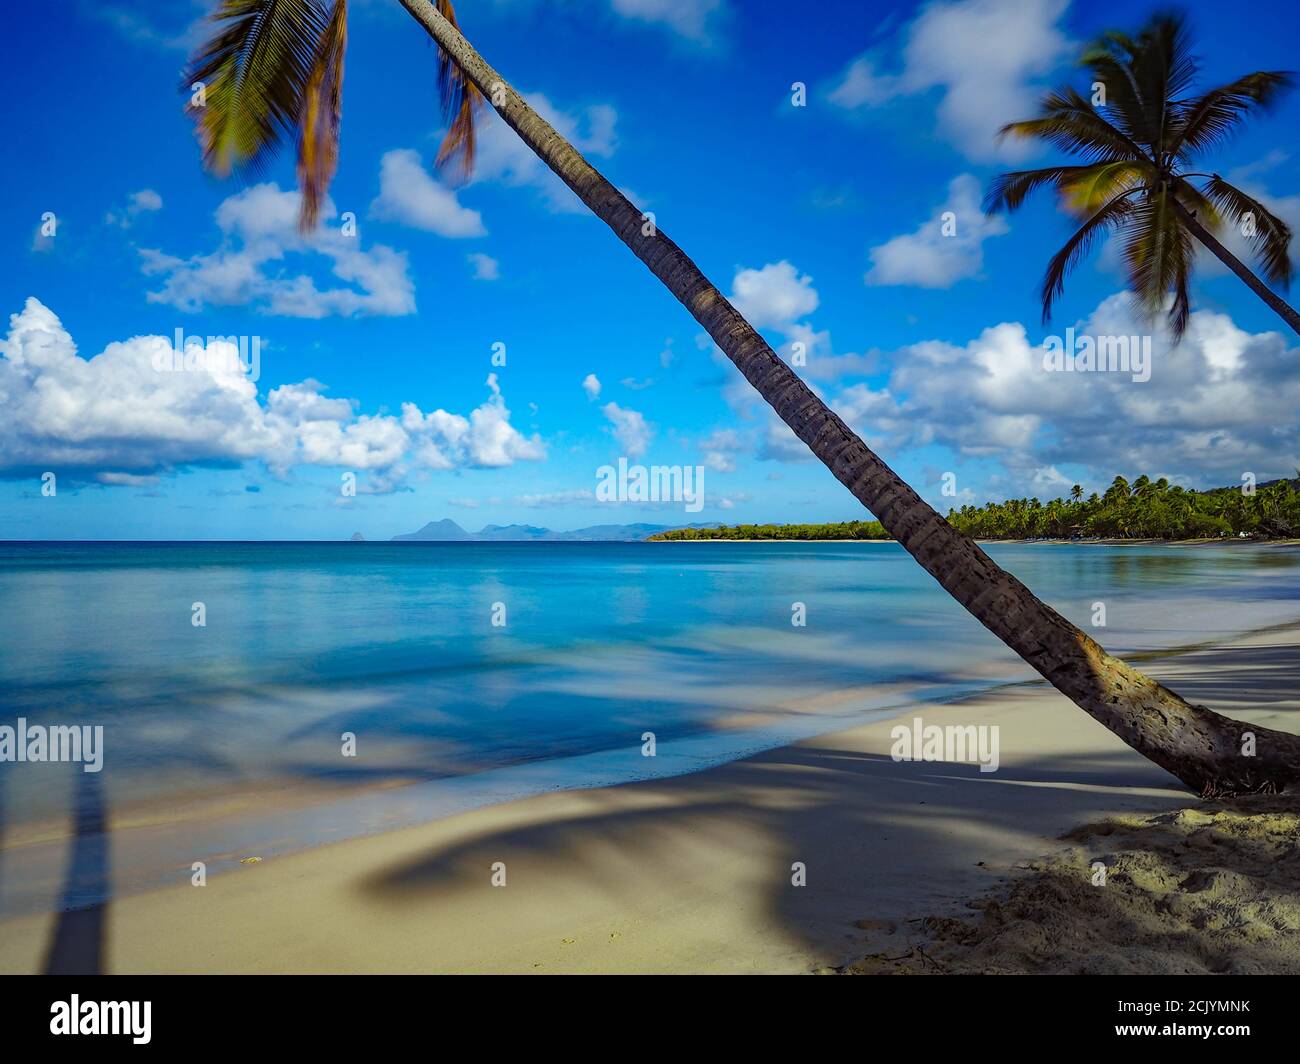 The Plage des Salines, located on the Grande Anse des Salines, is a beach in the town of Sainte-Anne, in Martinique. The Salines beach is very popular. Stock Photo